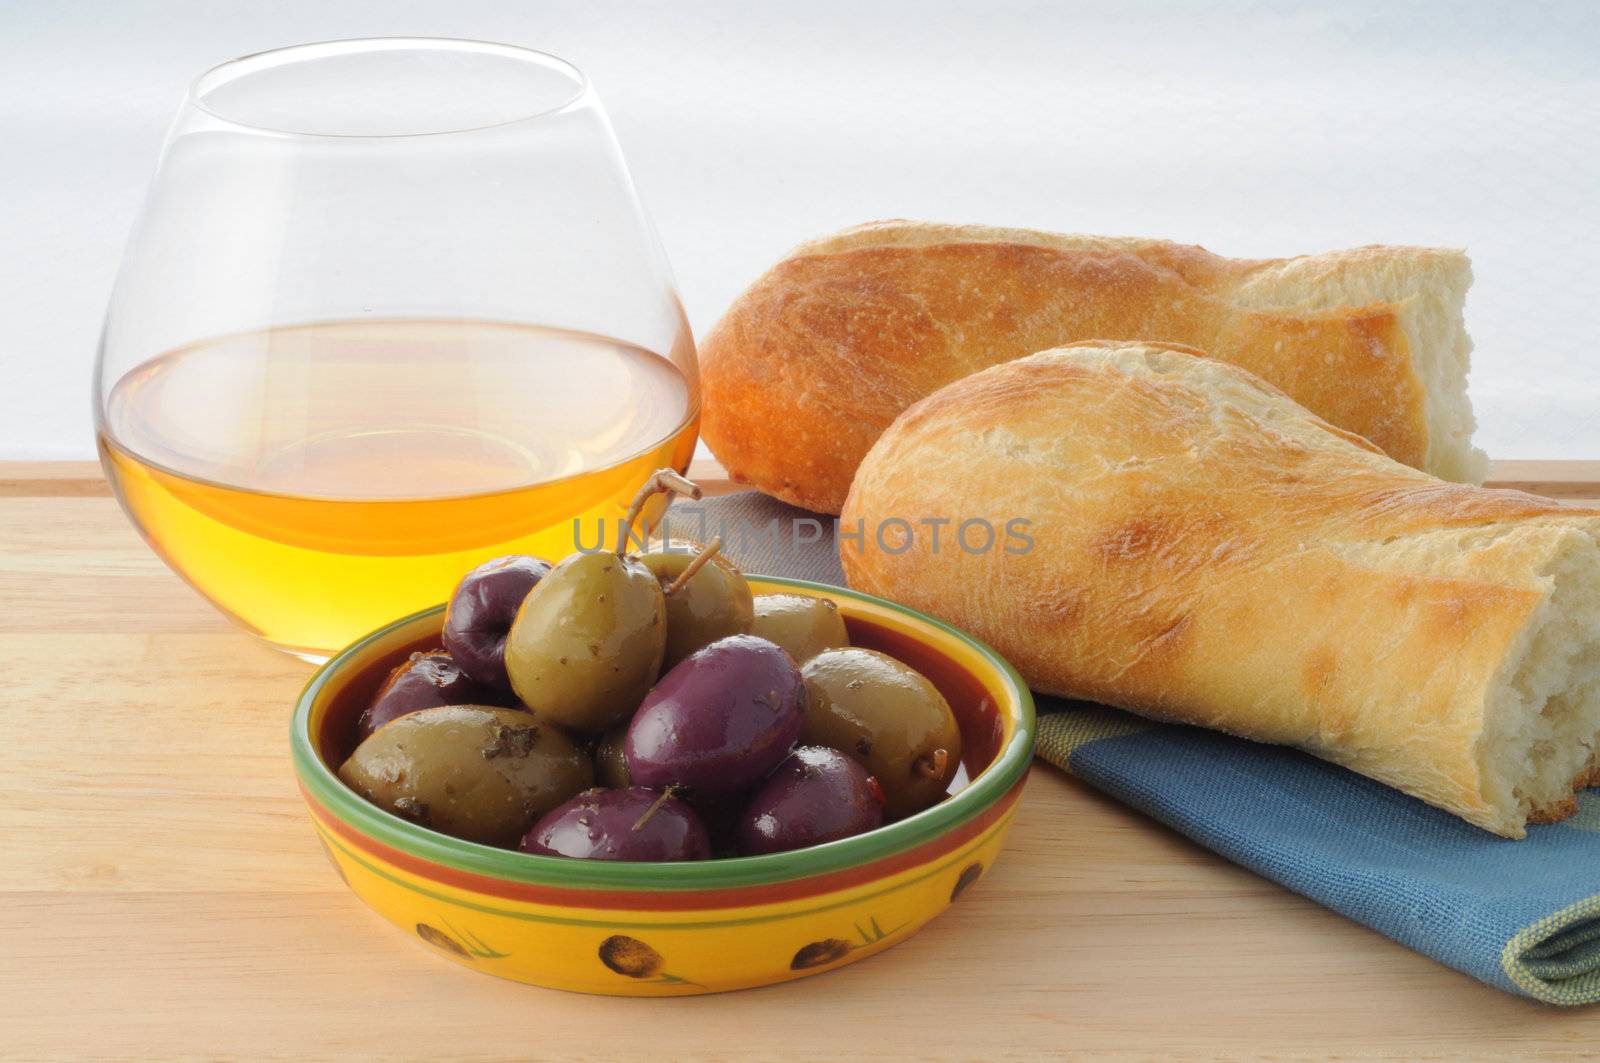 Olives by billberryphotography